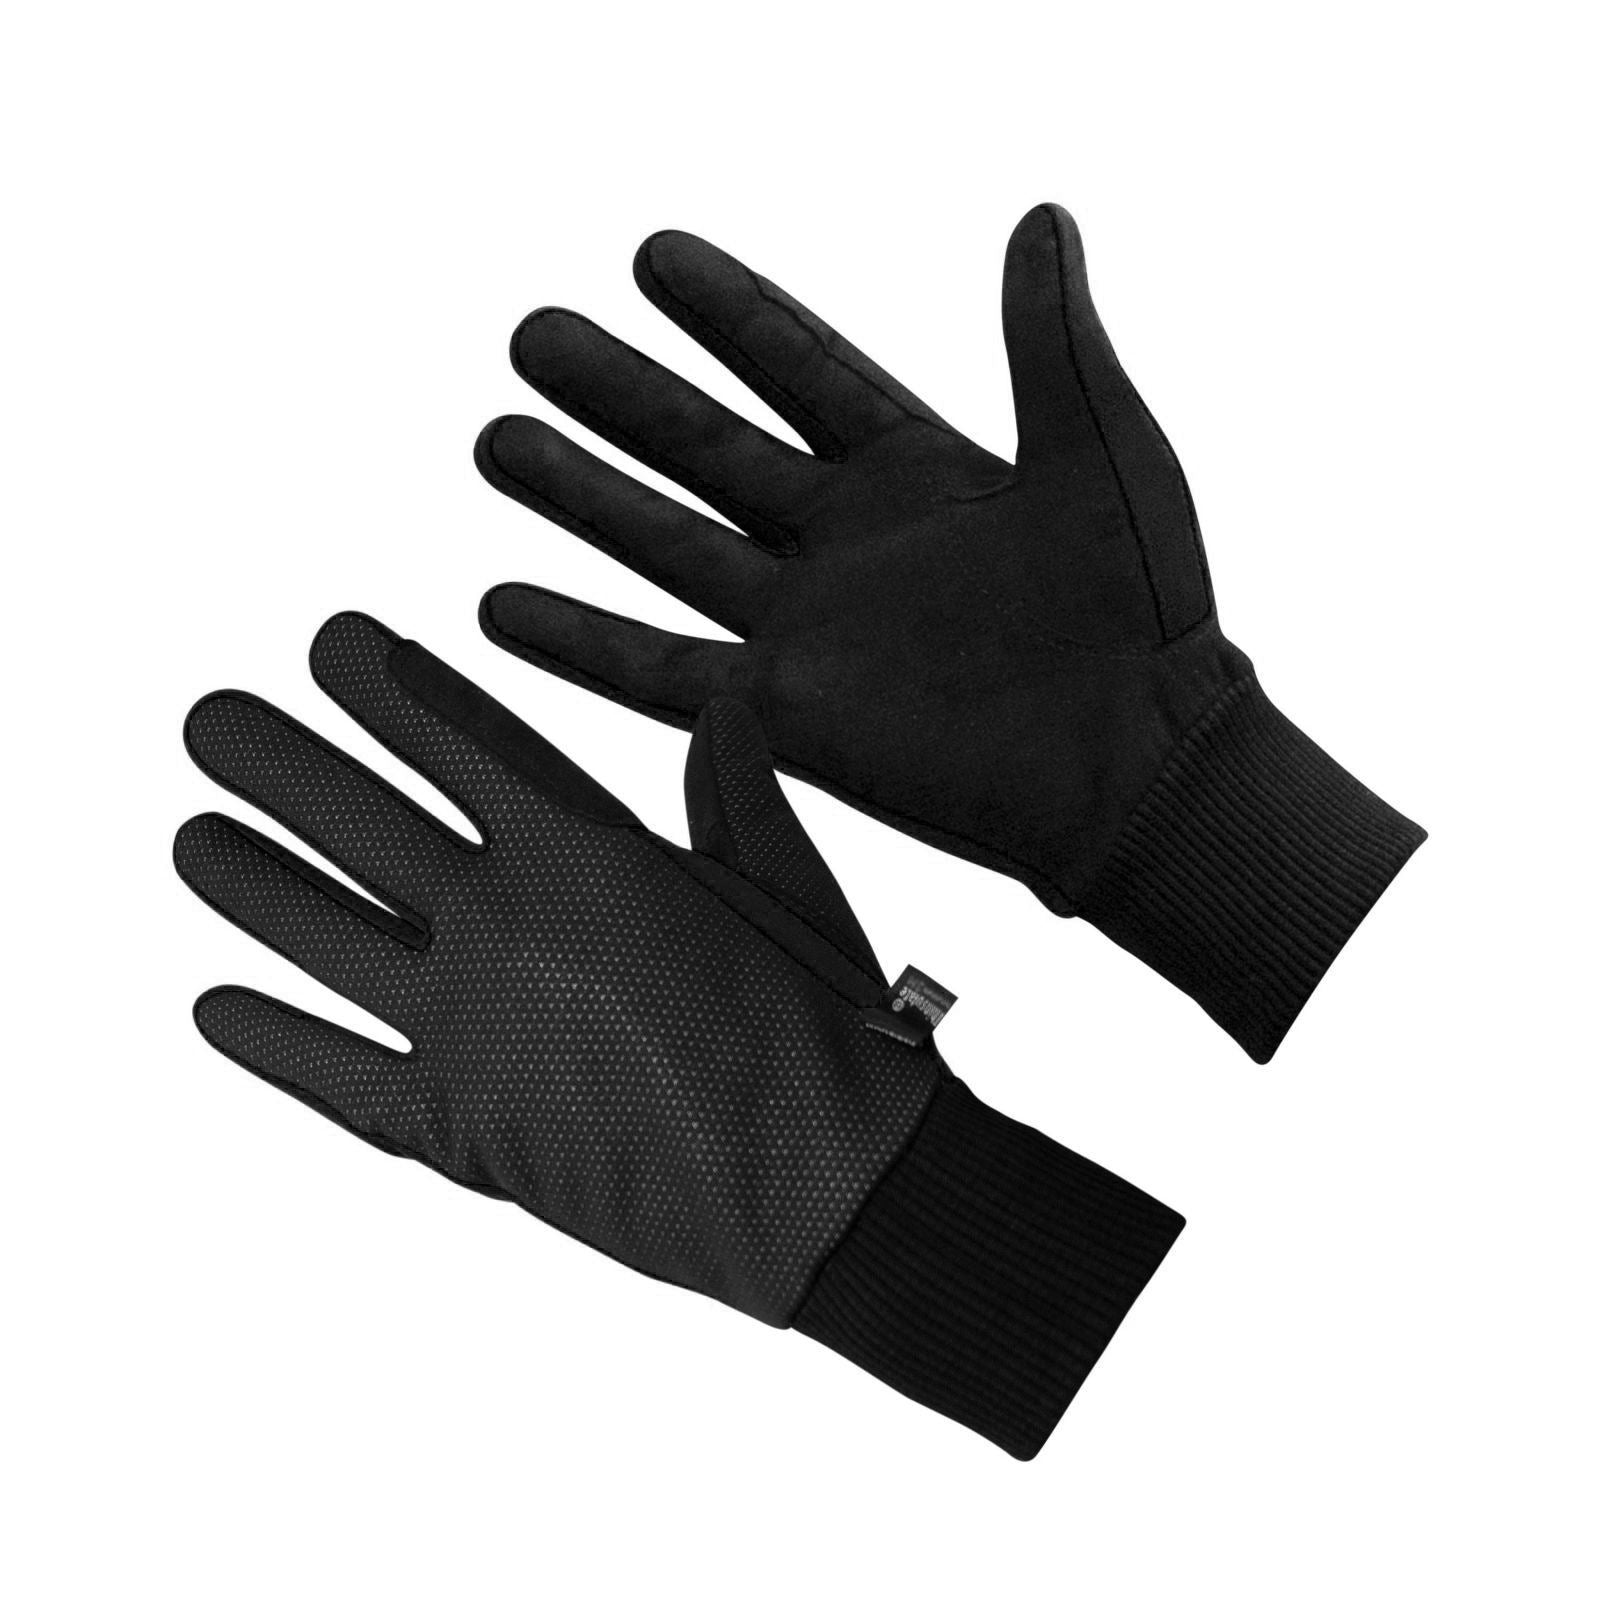 KM Elite KM Thermal Winter Horse Riding Gloves - Just Horse Riders